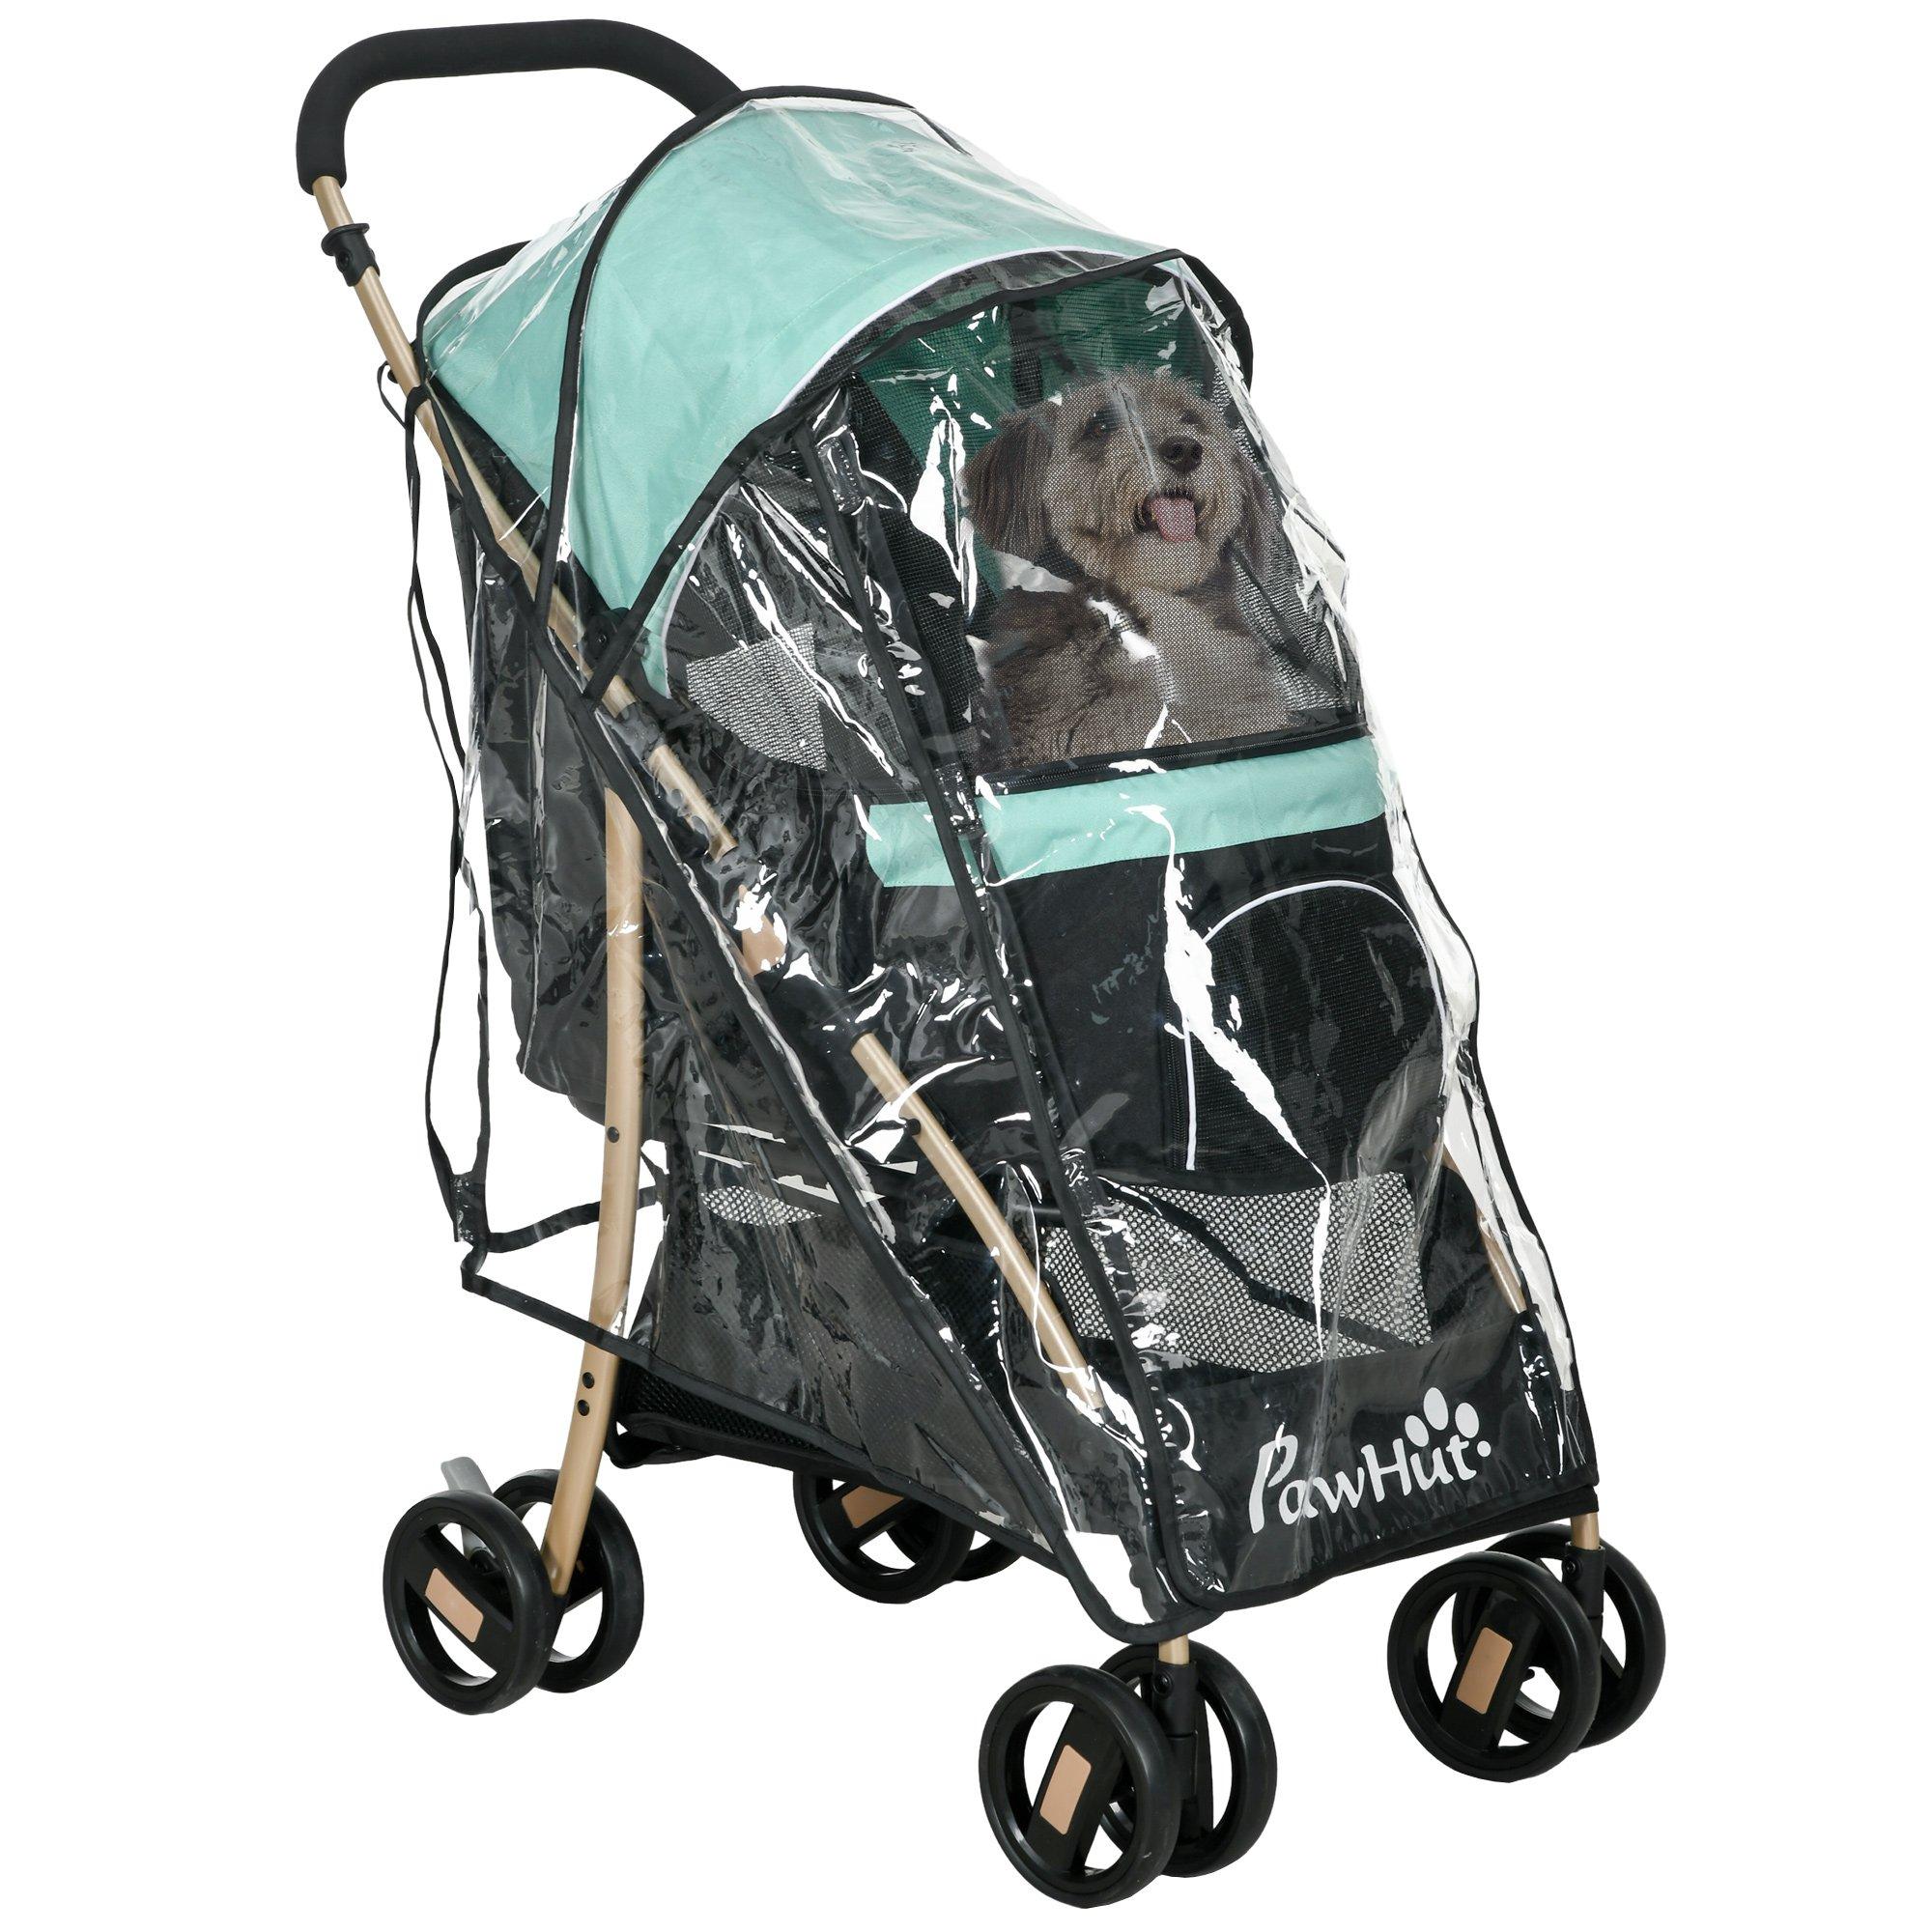 Pet Stroller for S and XS Dogs Cats with Rain Cover, Storage Basket